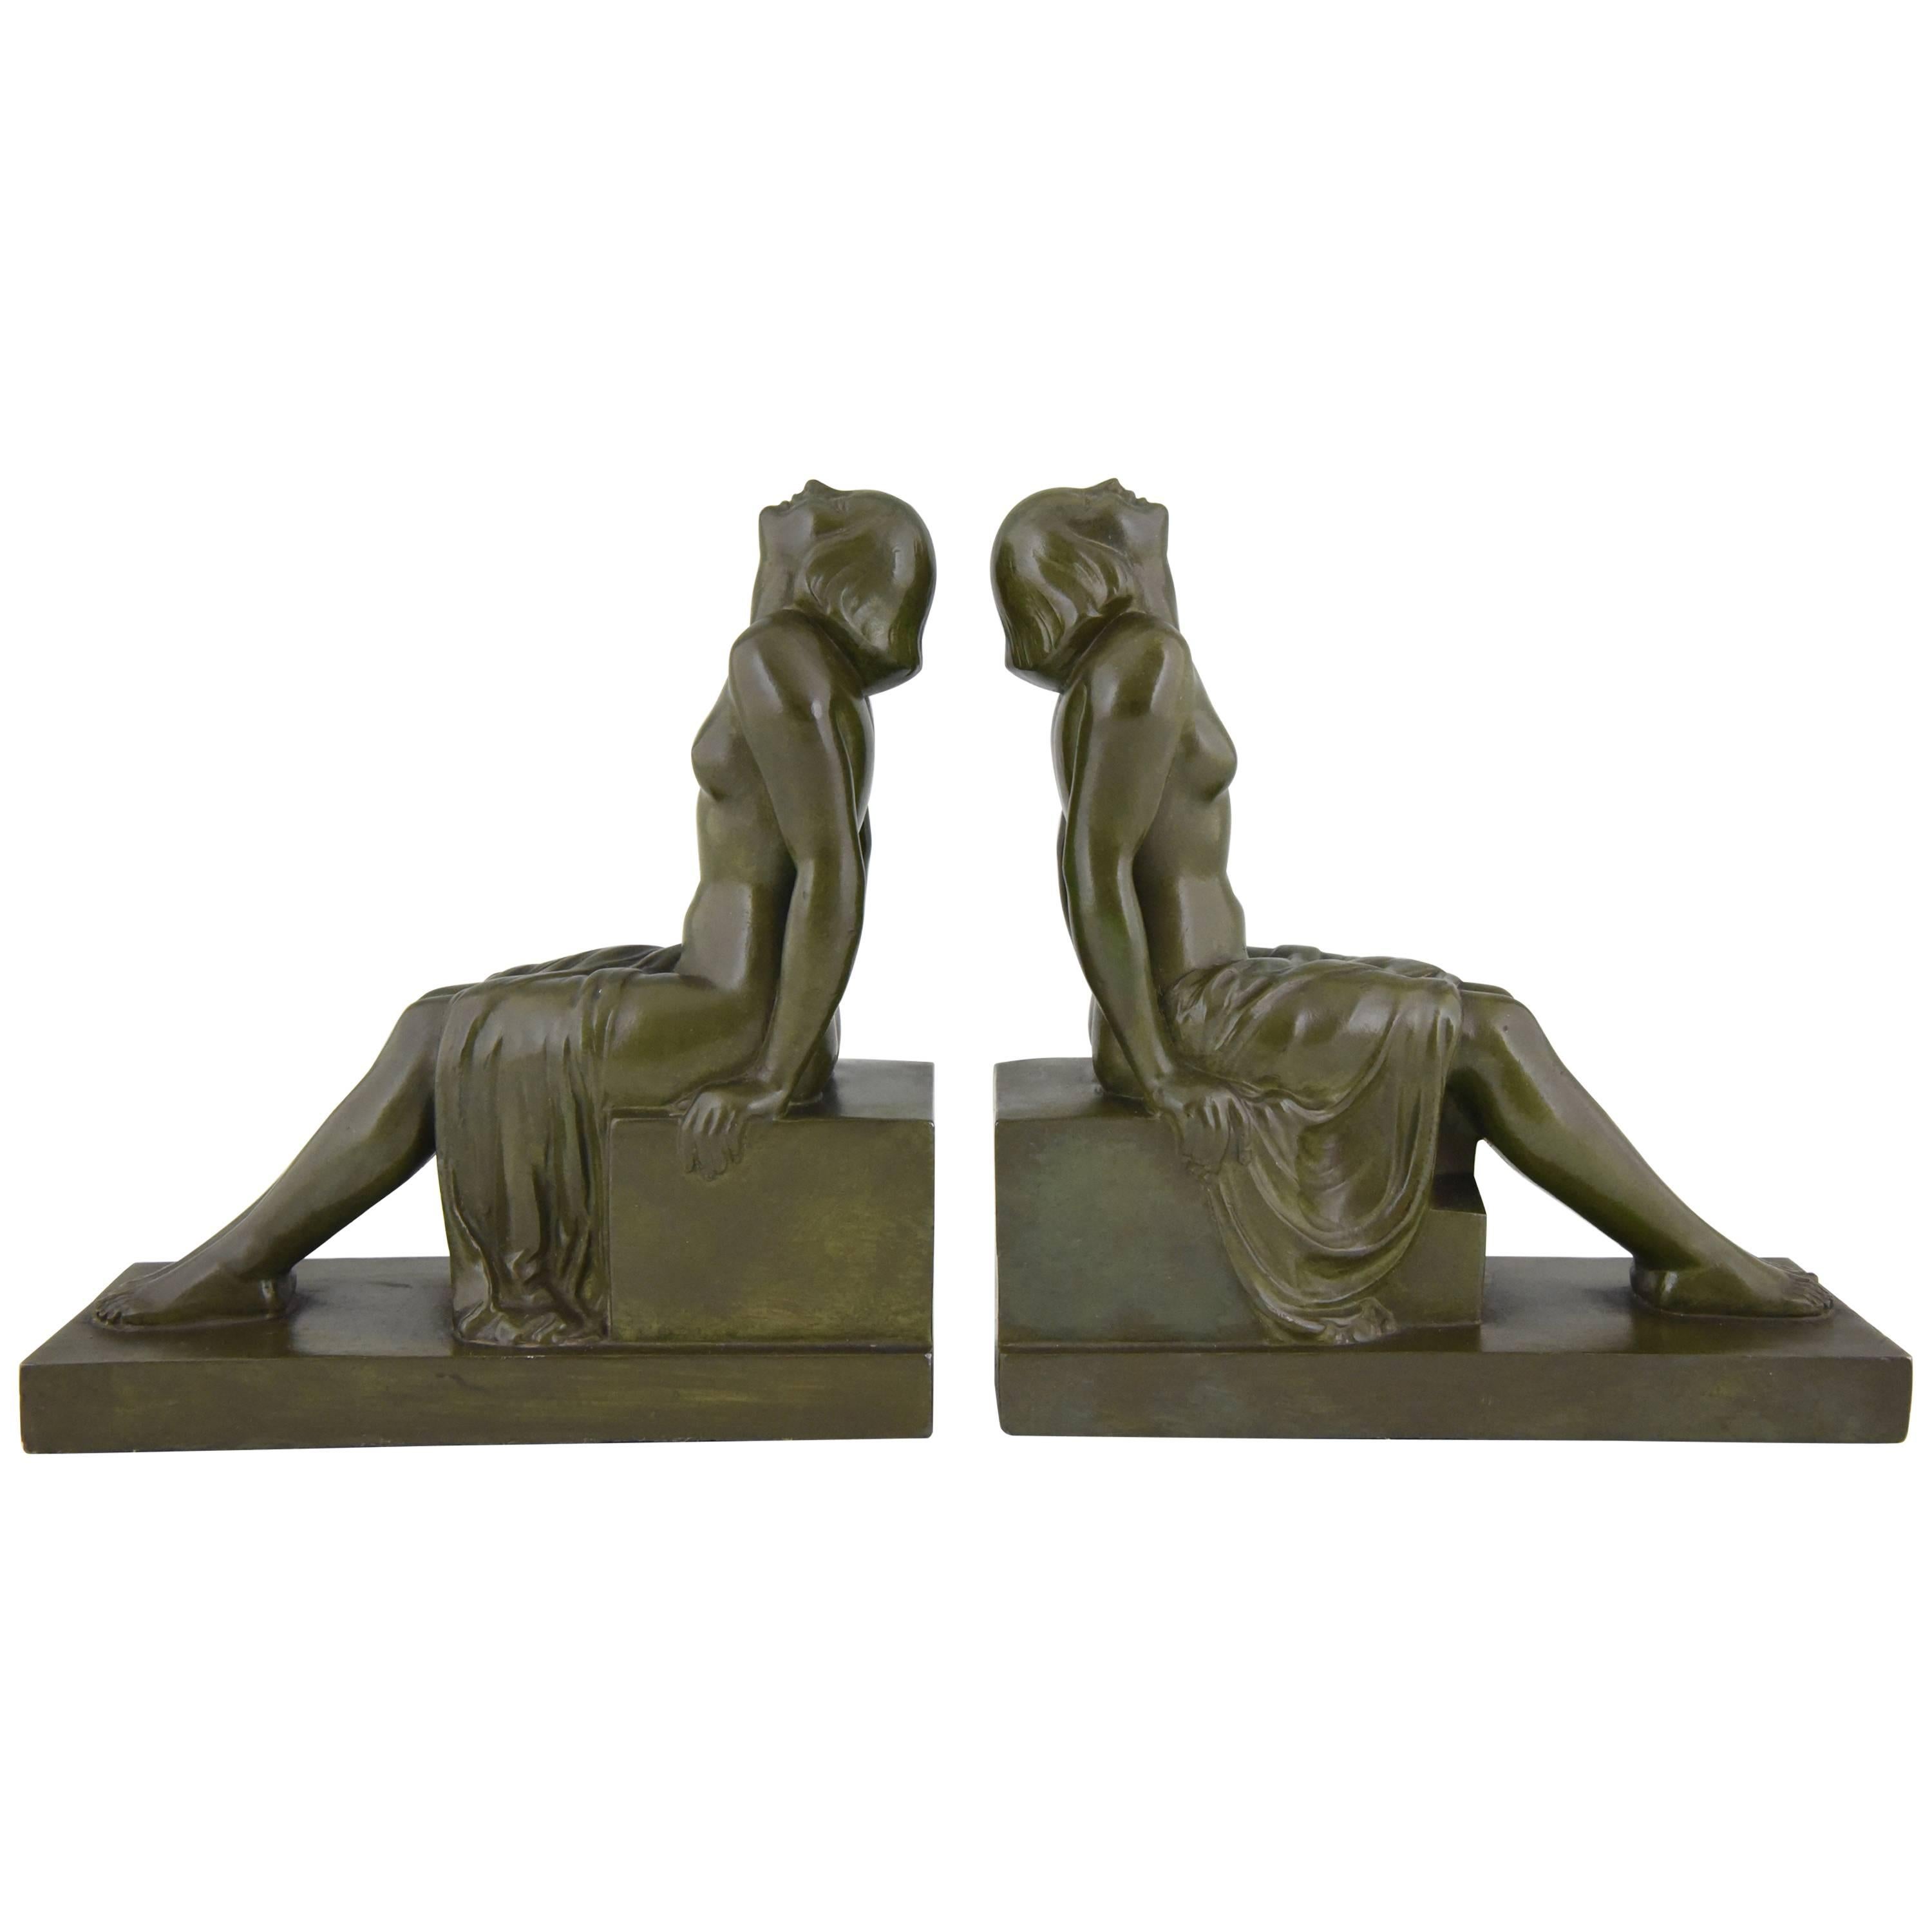 French Art Deco Bookends Sitting Nudes by Janle, 1930